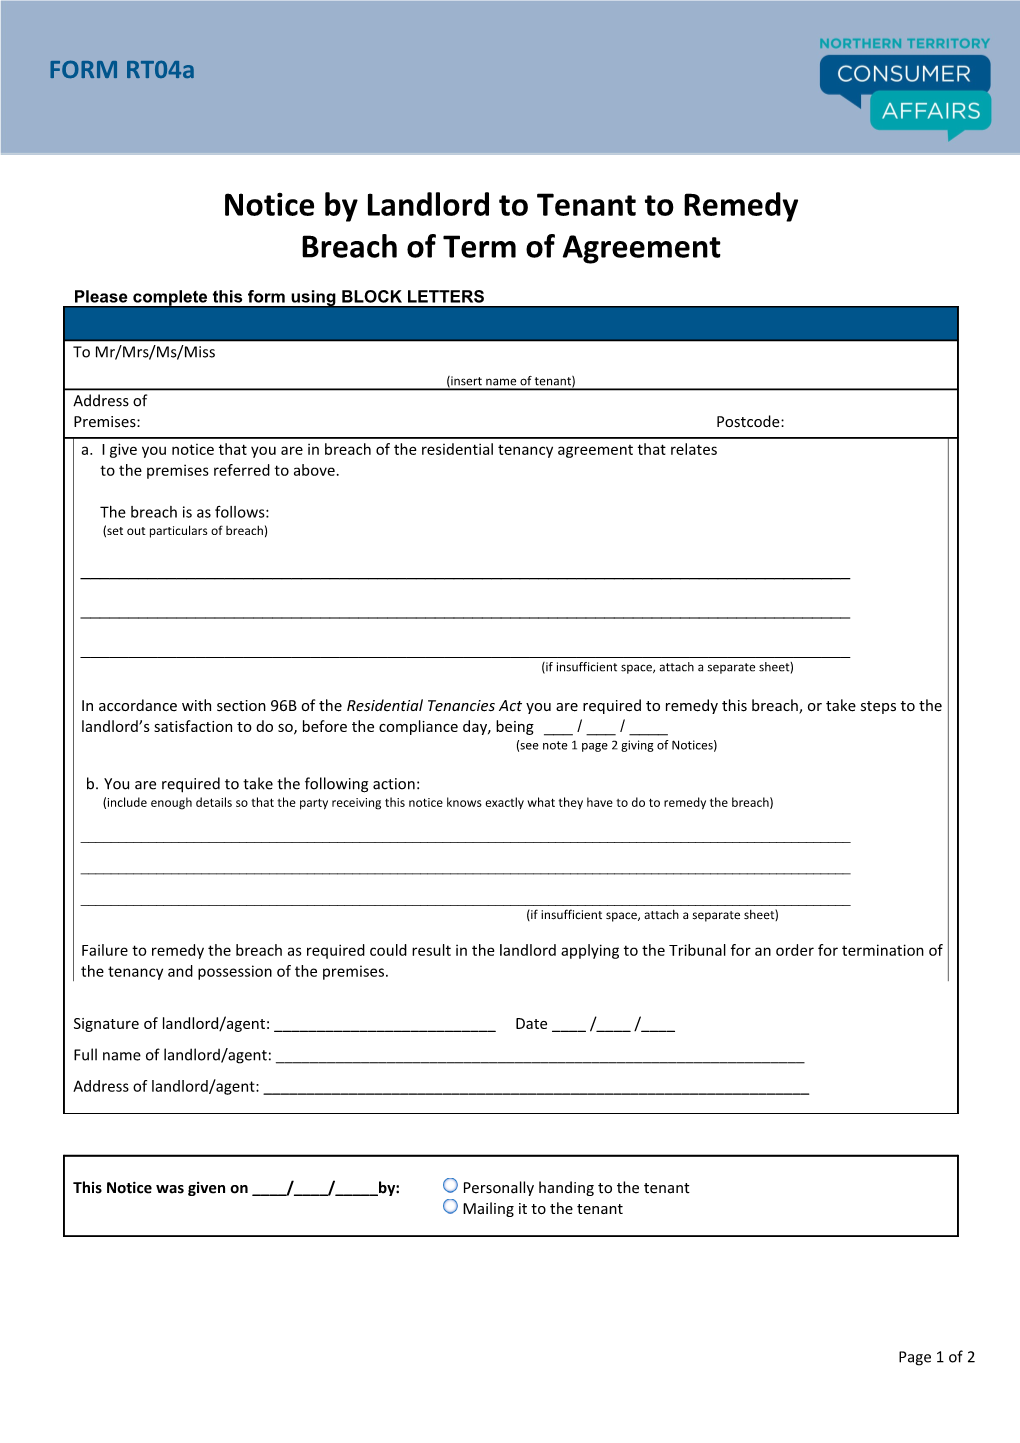 Form RT04 - Notice to Remedy Breach by Landlord